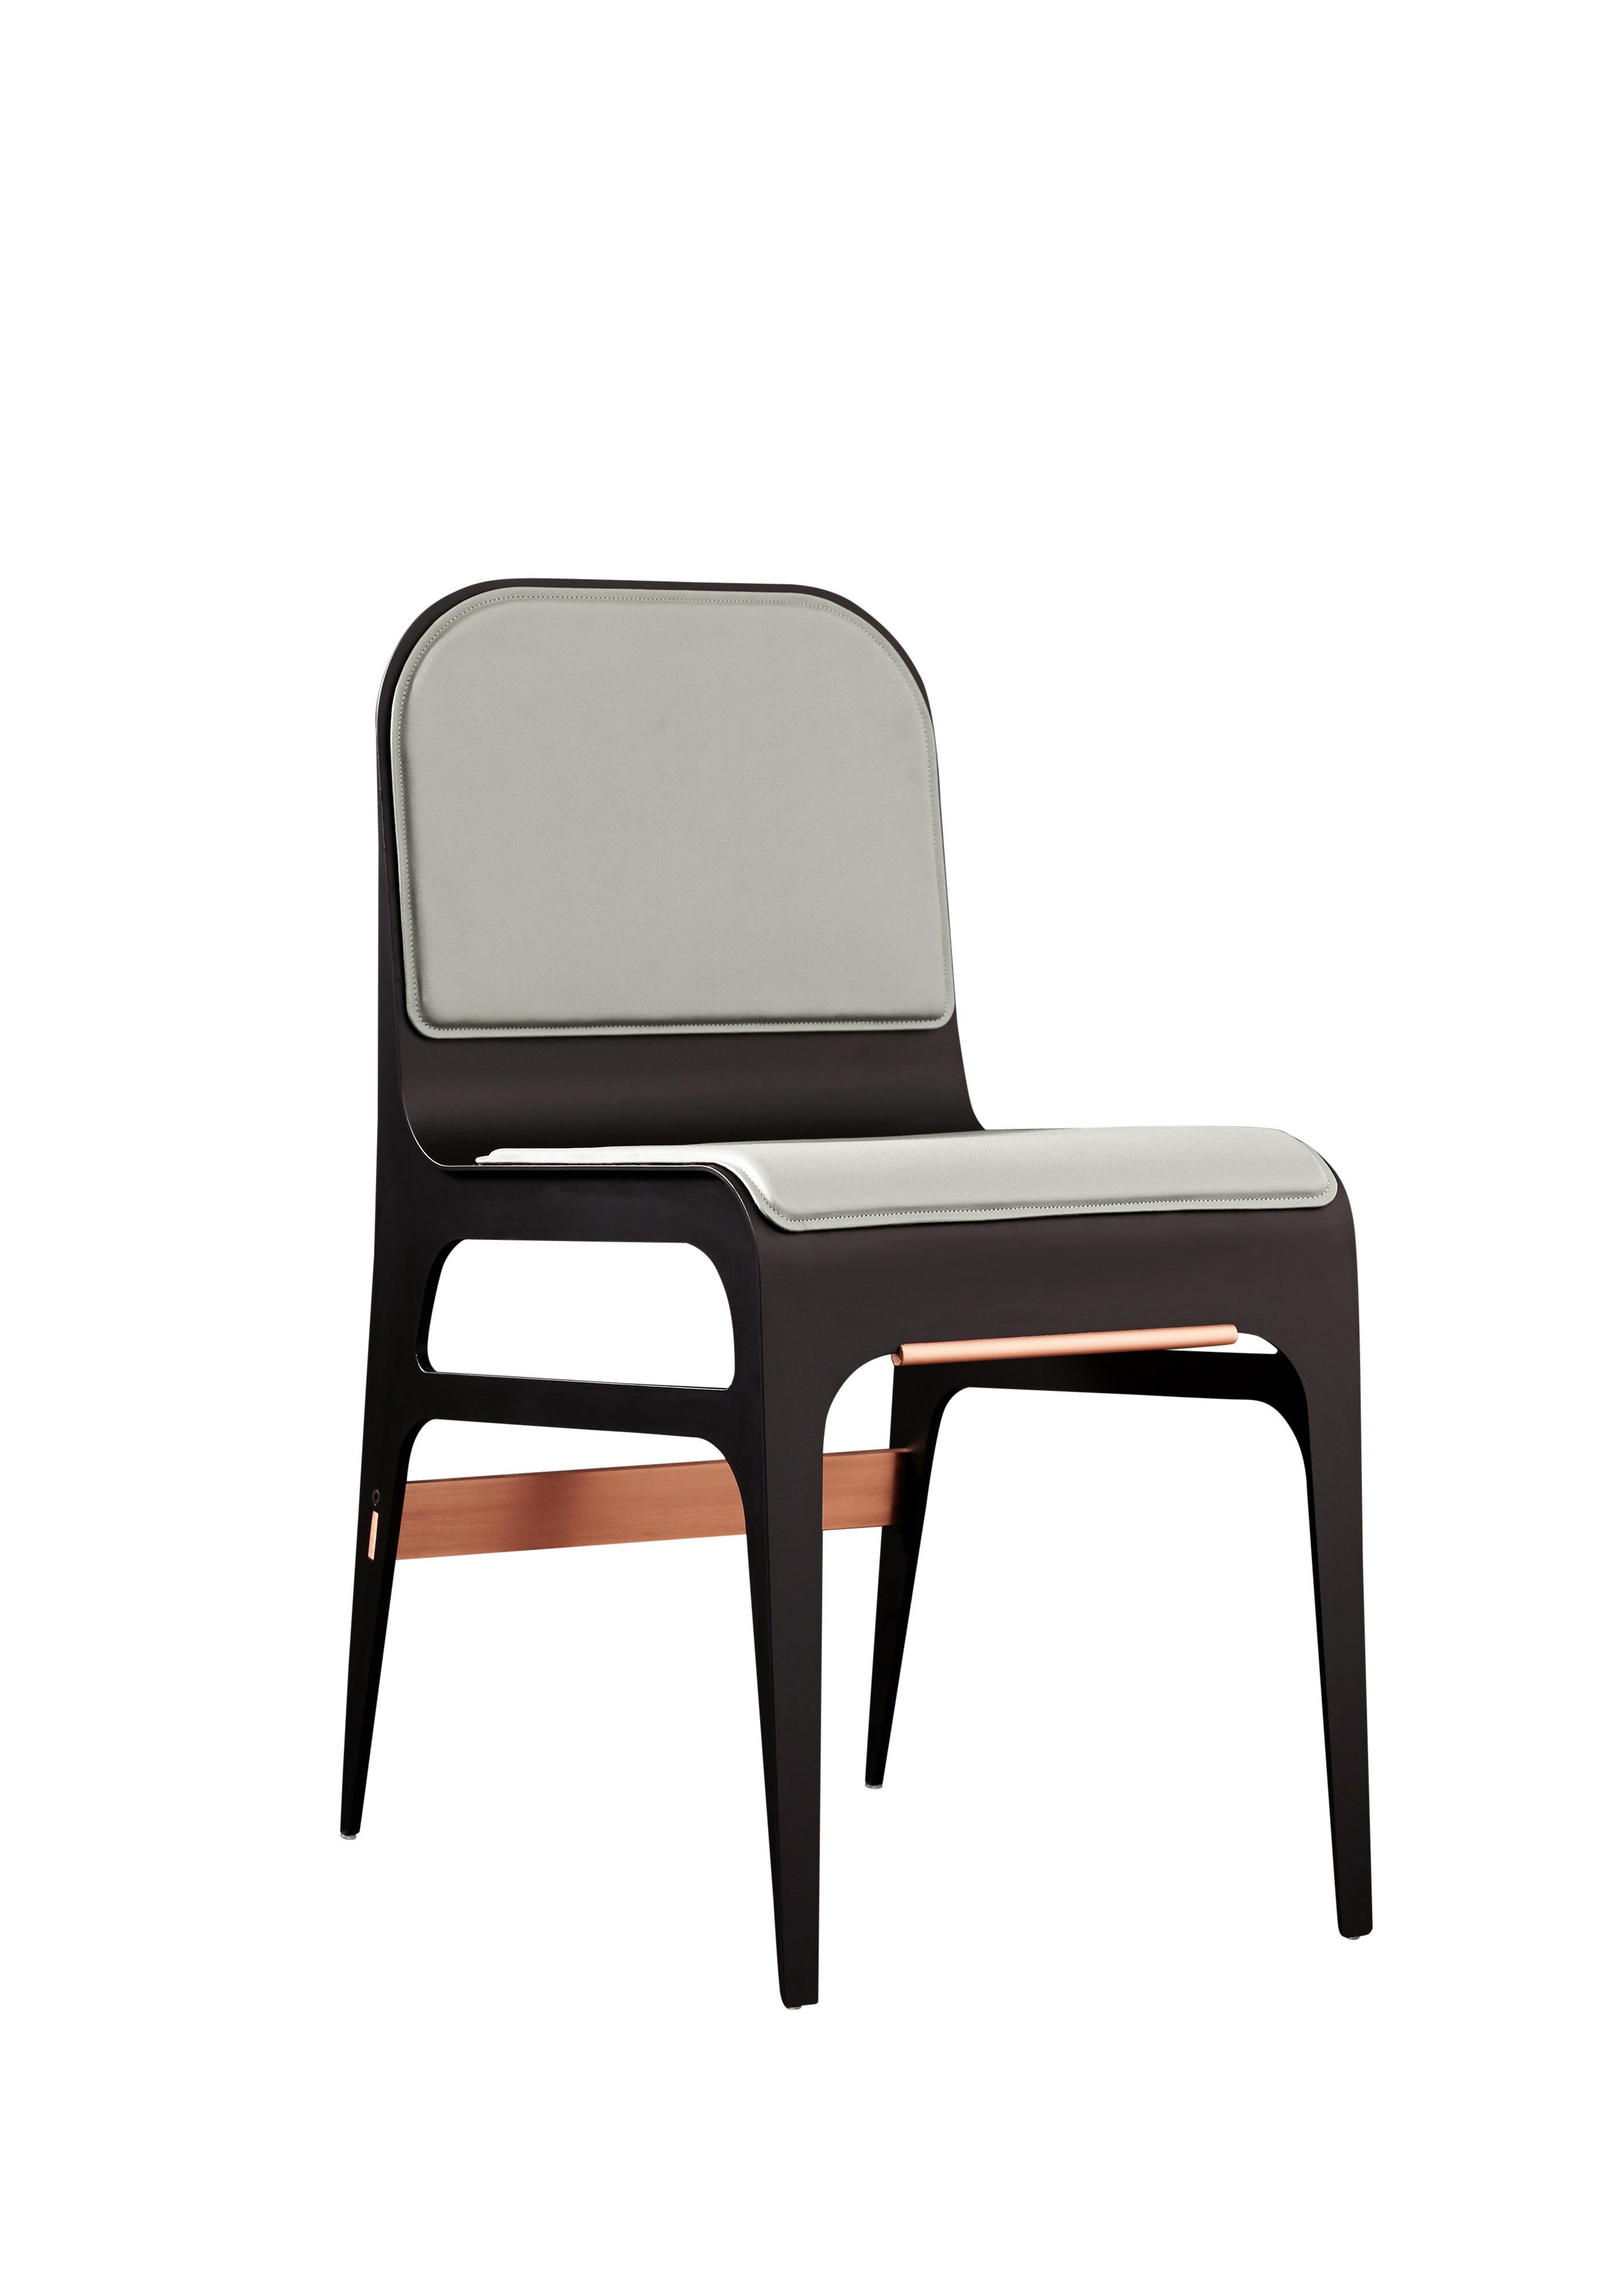 Gray (Slate Gray) Bardot Dining Chair with Leather Seat and Satin Copper Hardware by Gabriel Scott